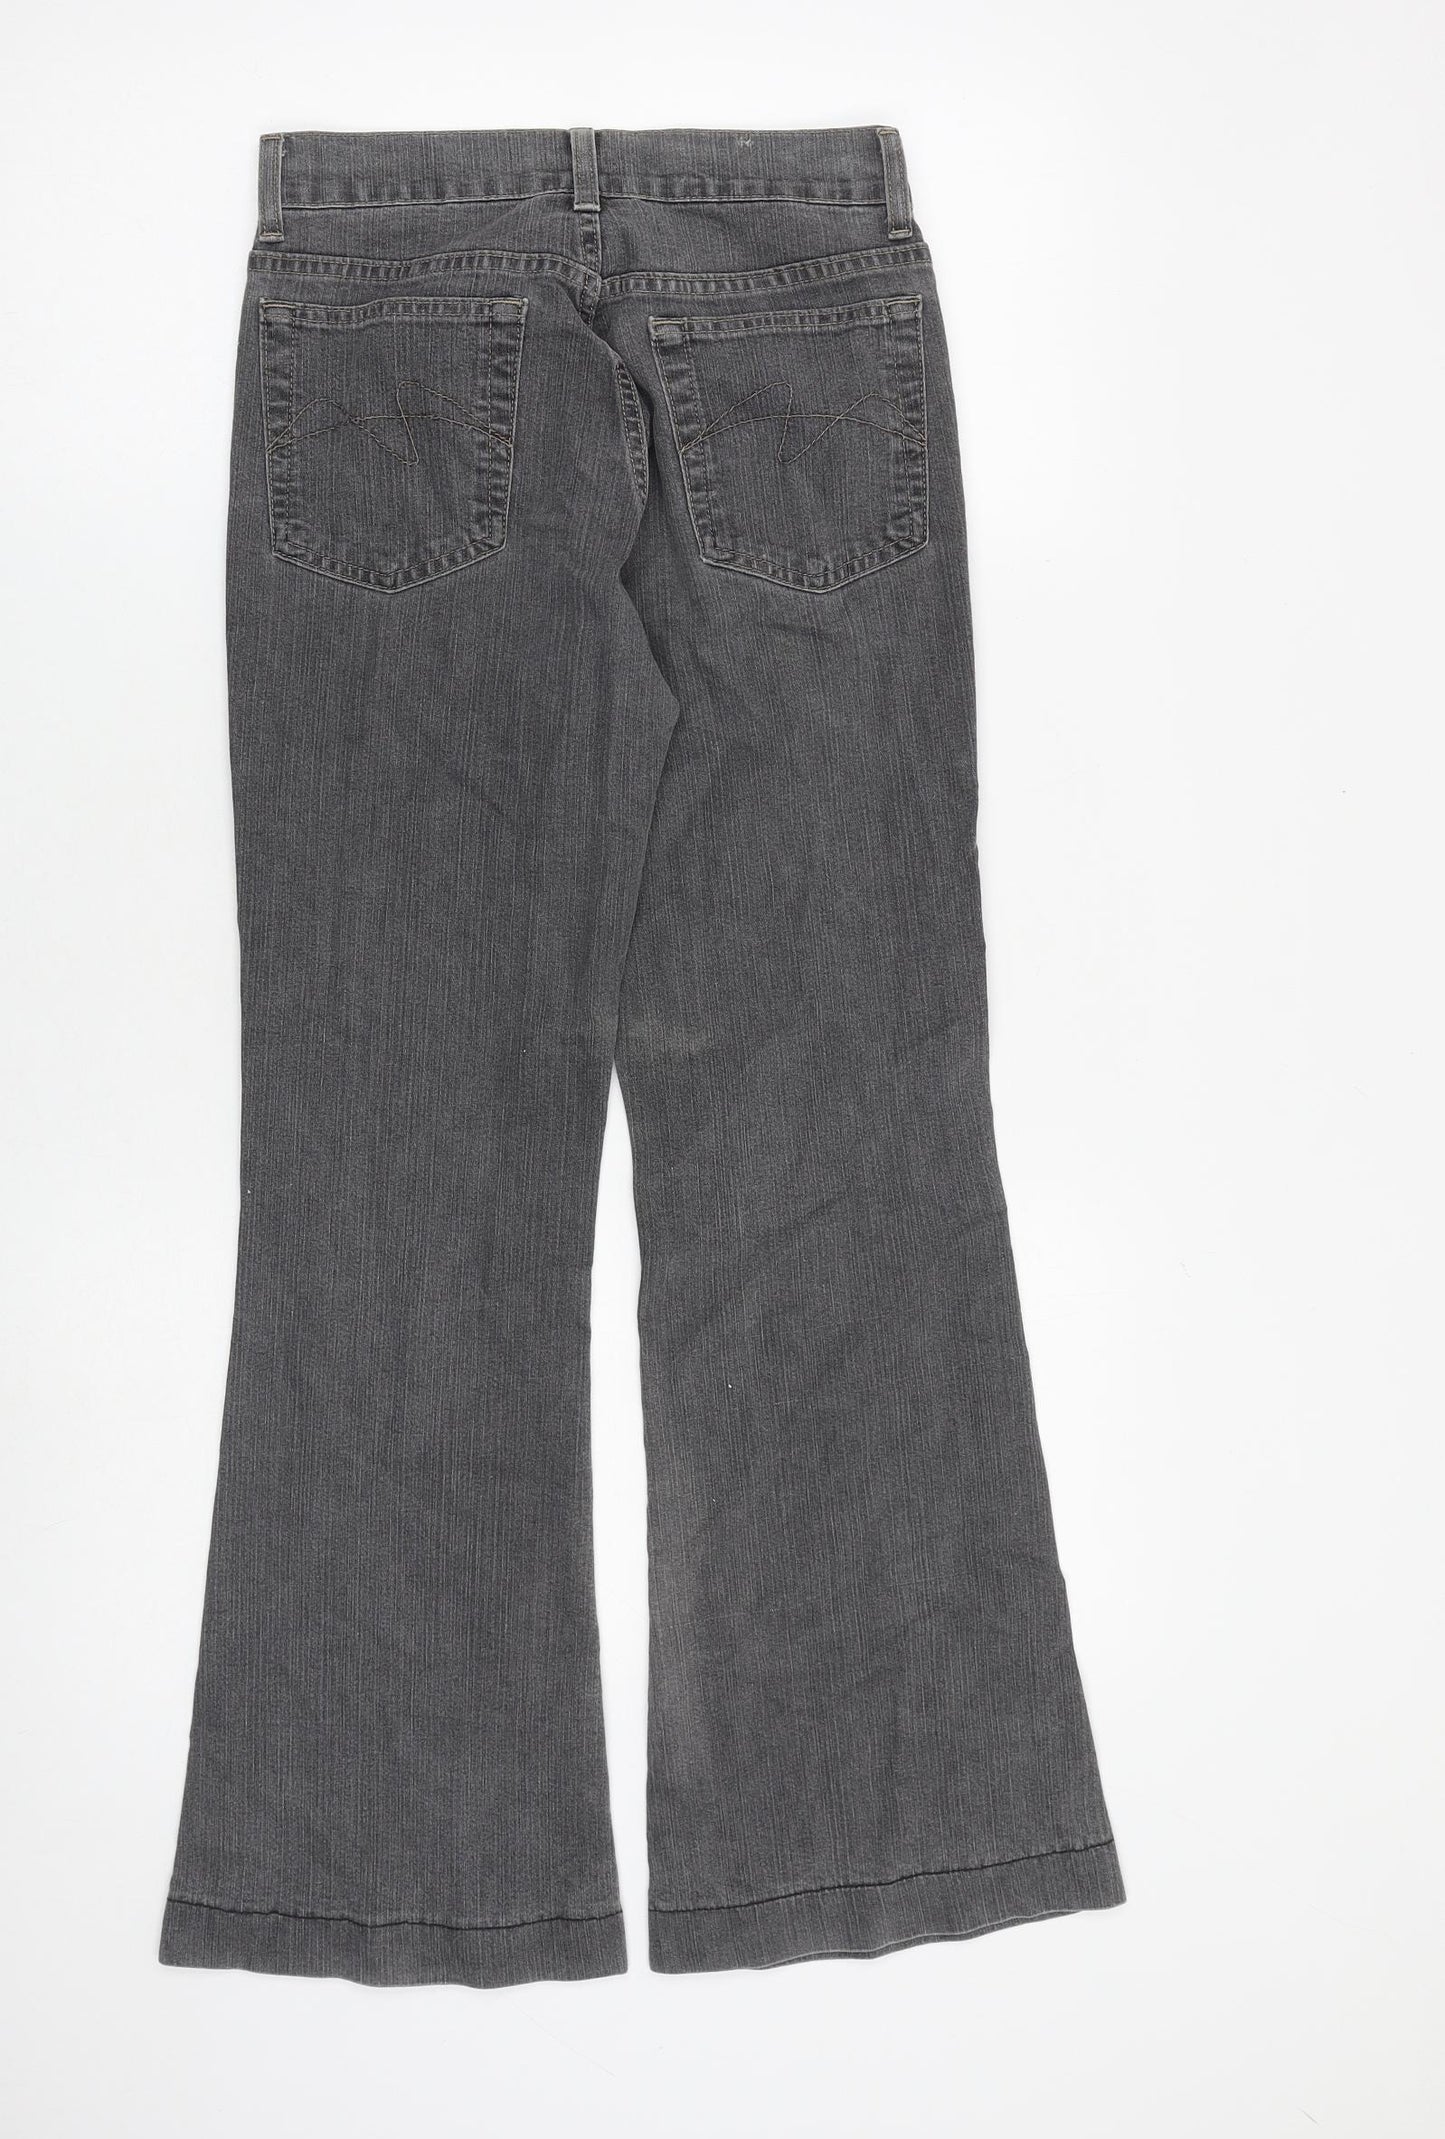 Principles Womens Grey Cotton Flared Jeans Size 6 L27 in Regular Zip